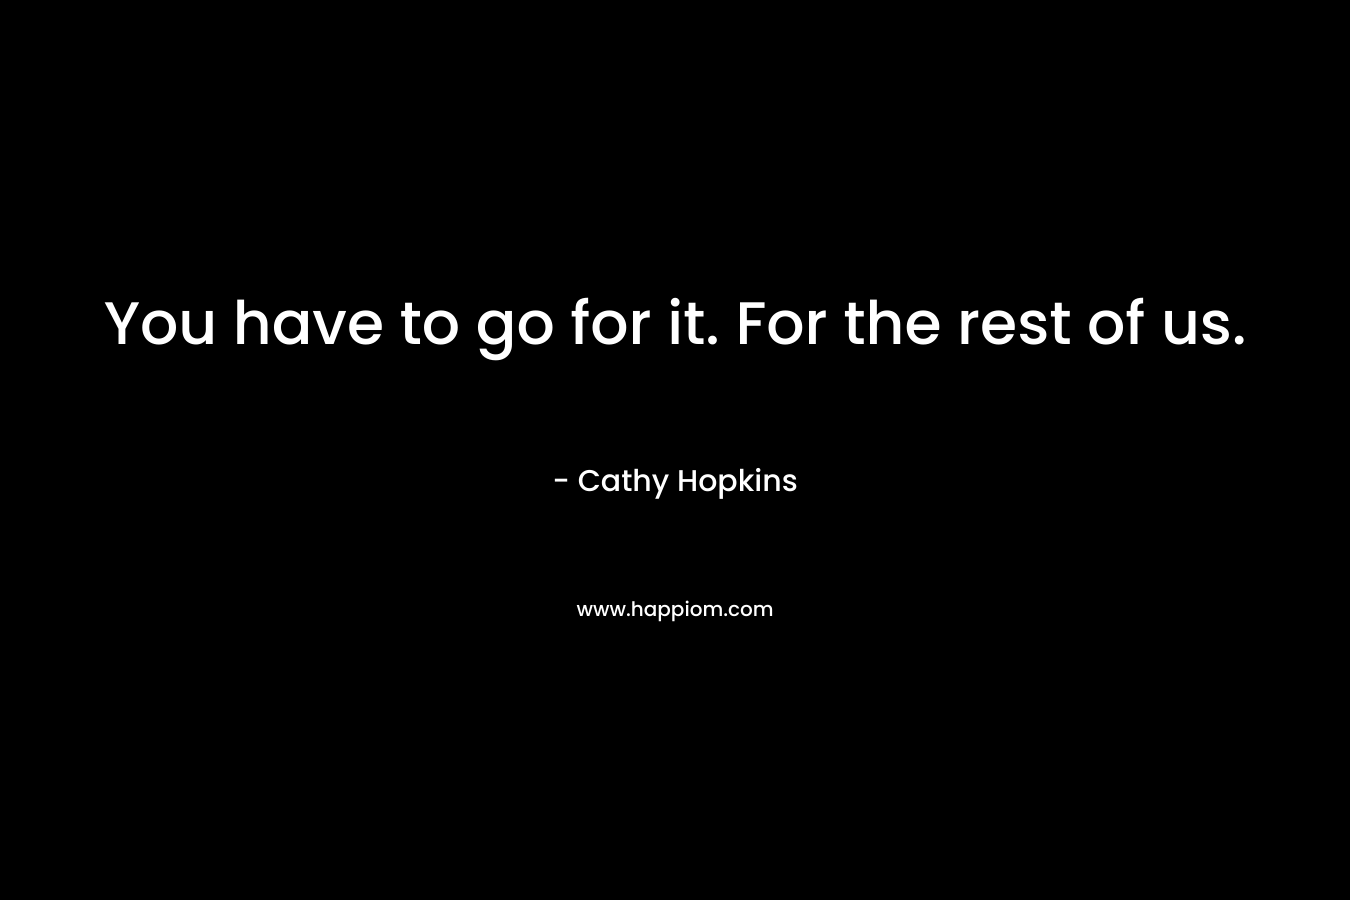 You have to go for it. For the rest of us. – Cathy Hopkins